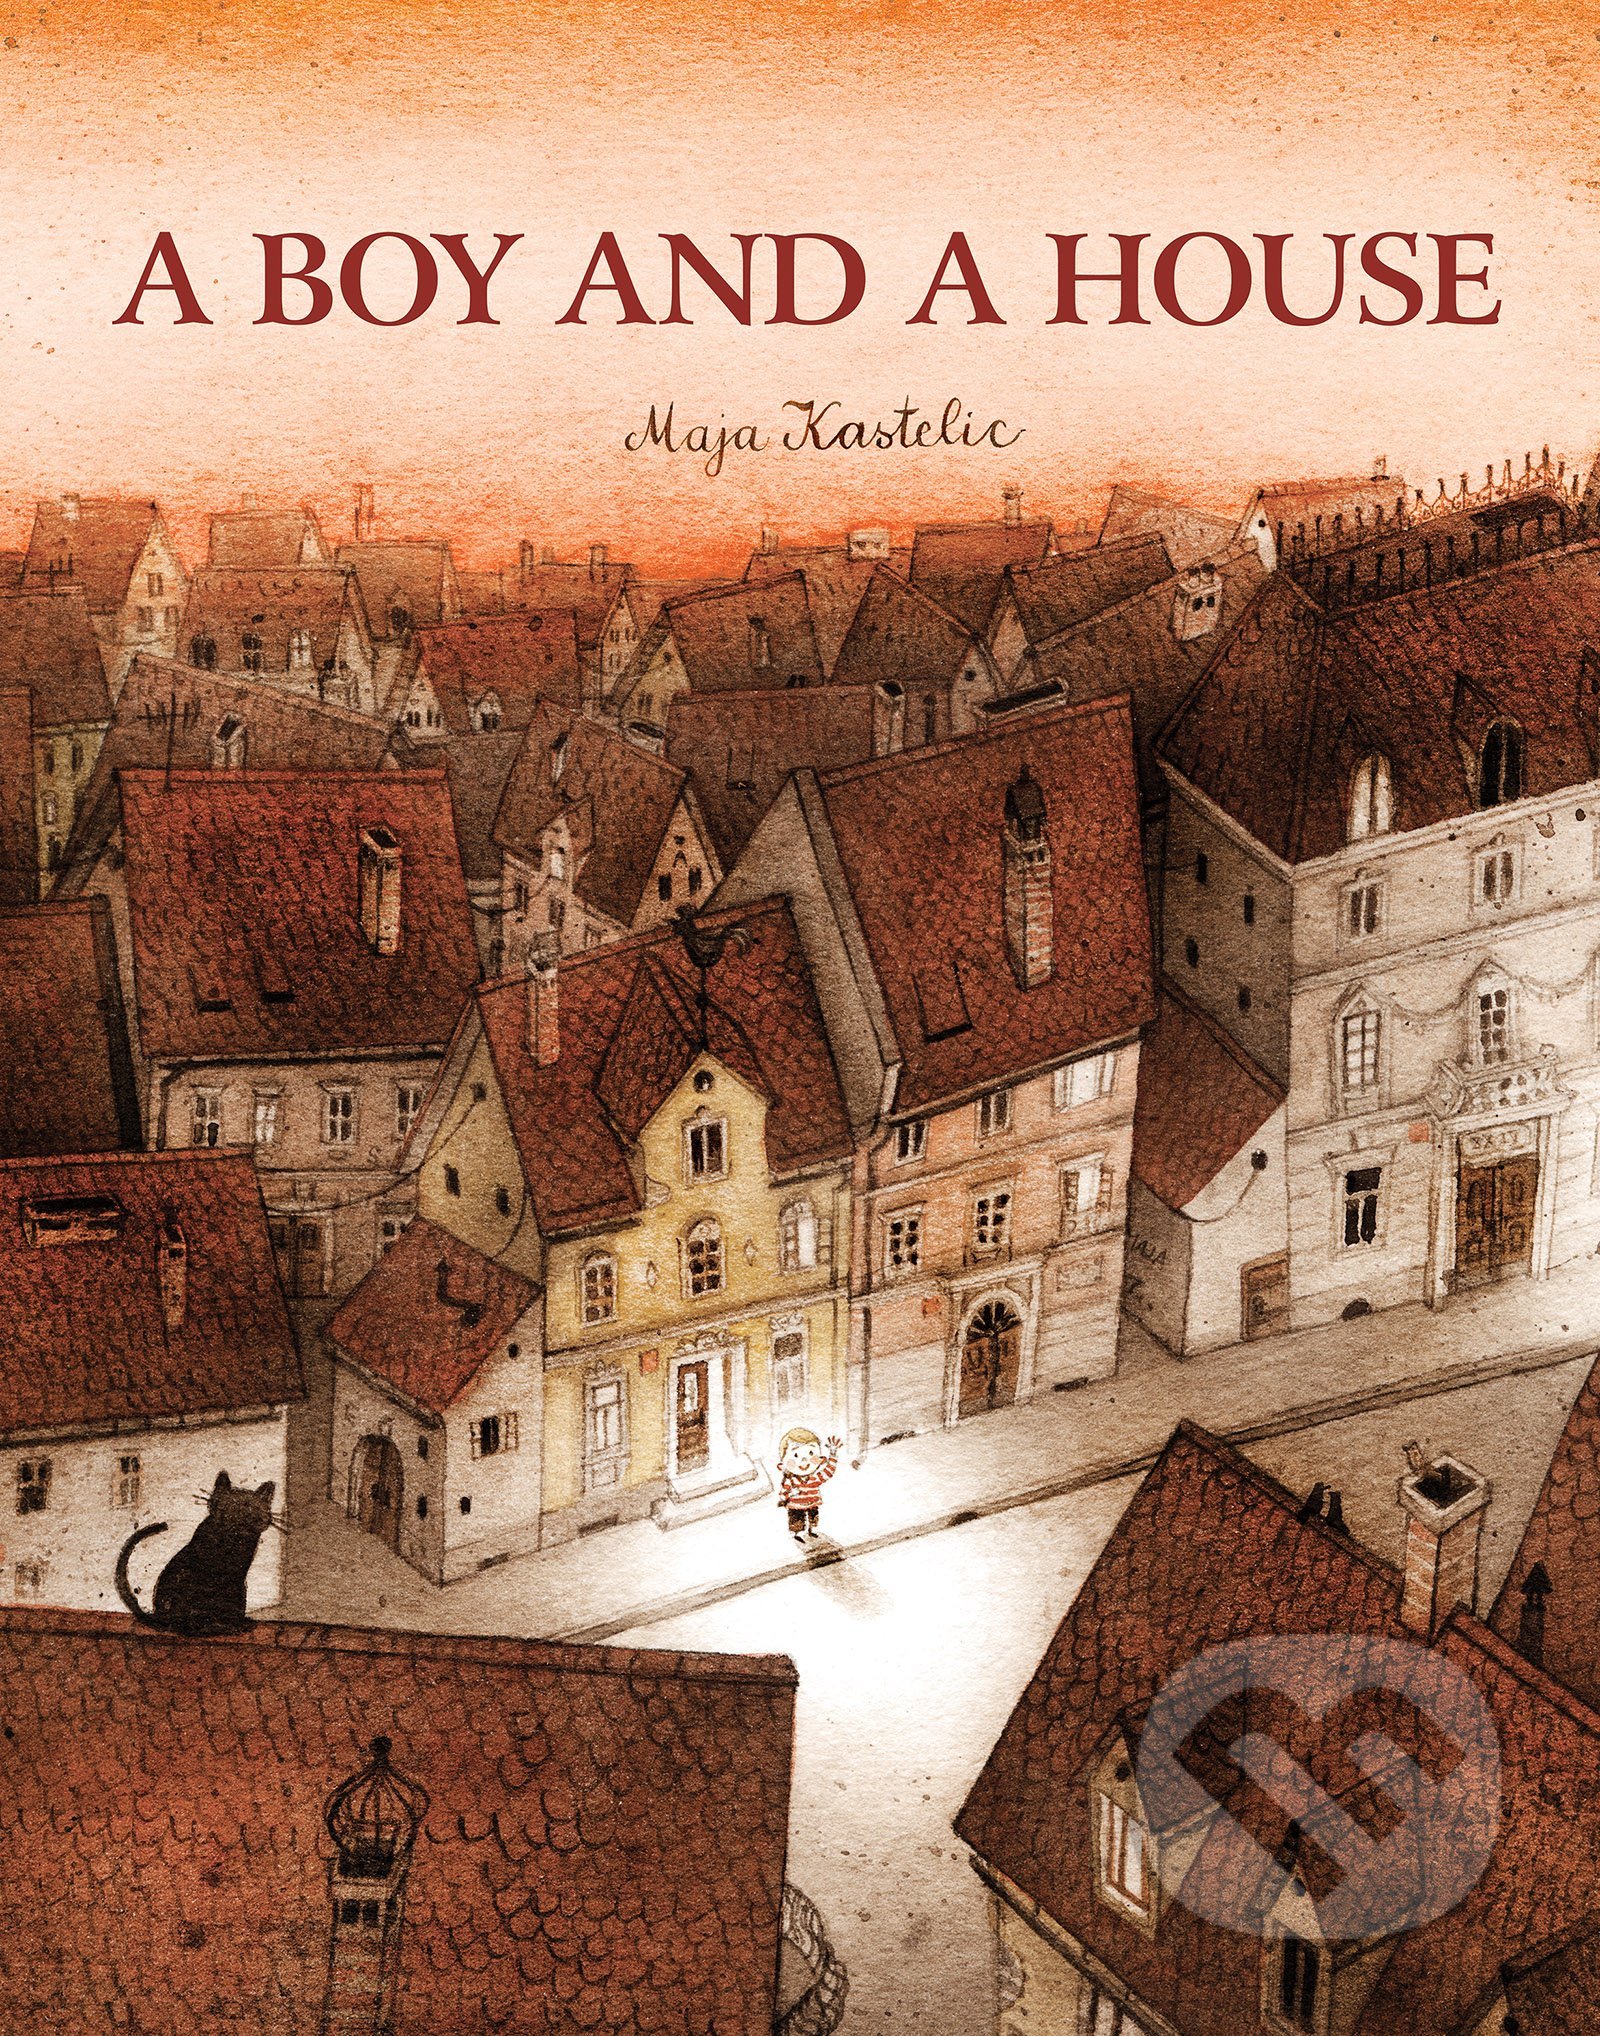 A Boy and a House - Maja Kastelic, Annick, 2018